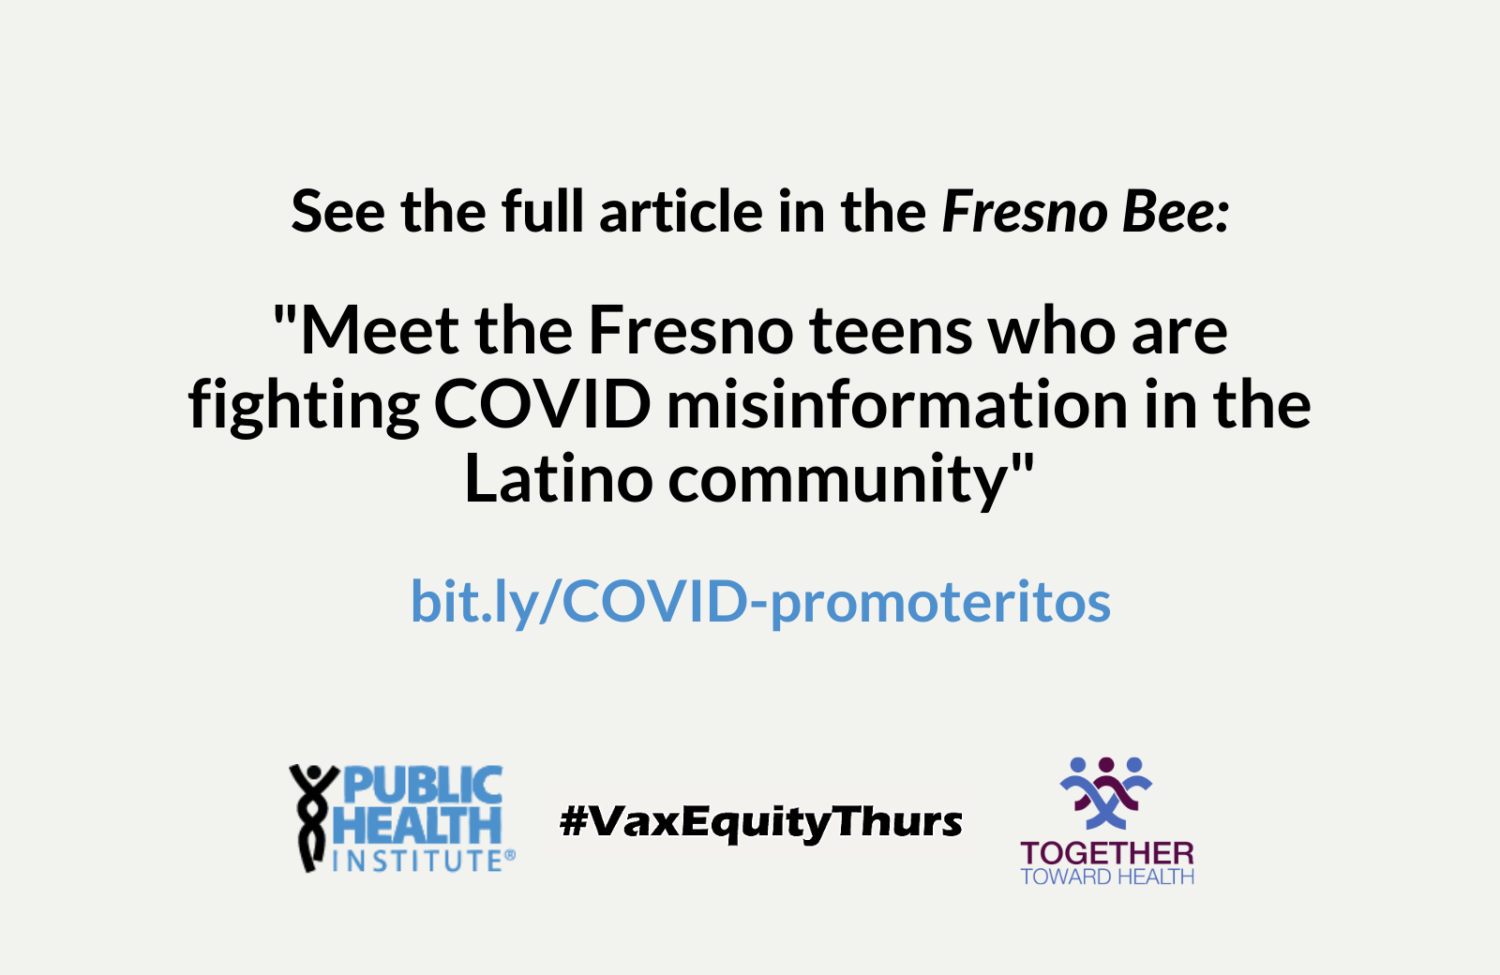 Read the full article in the Fresno Bee